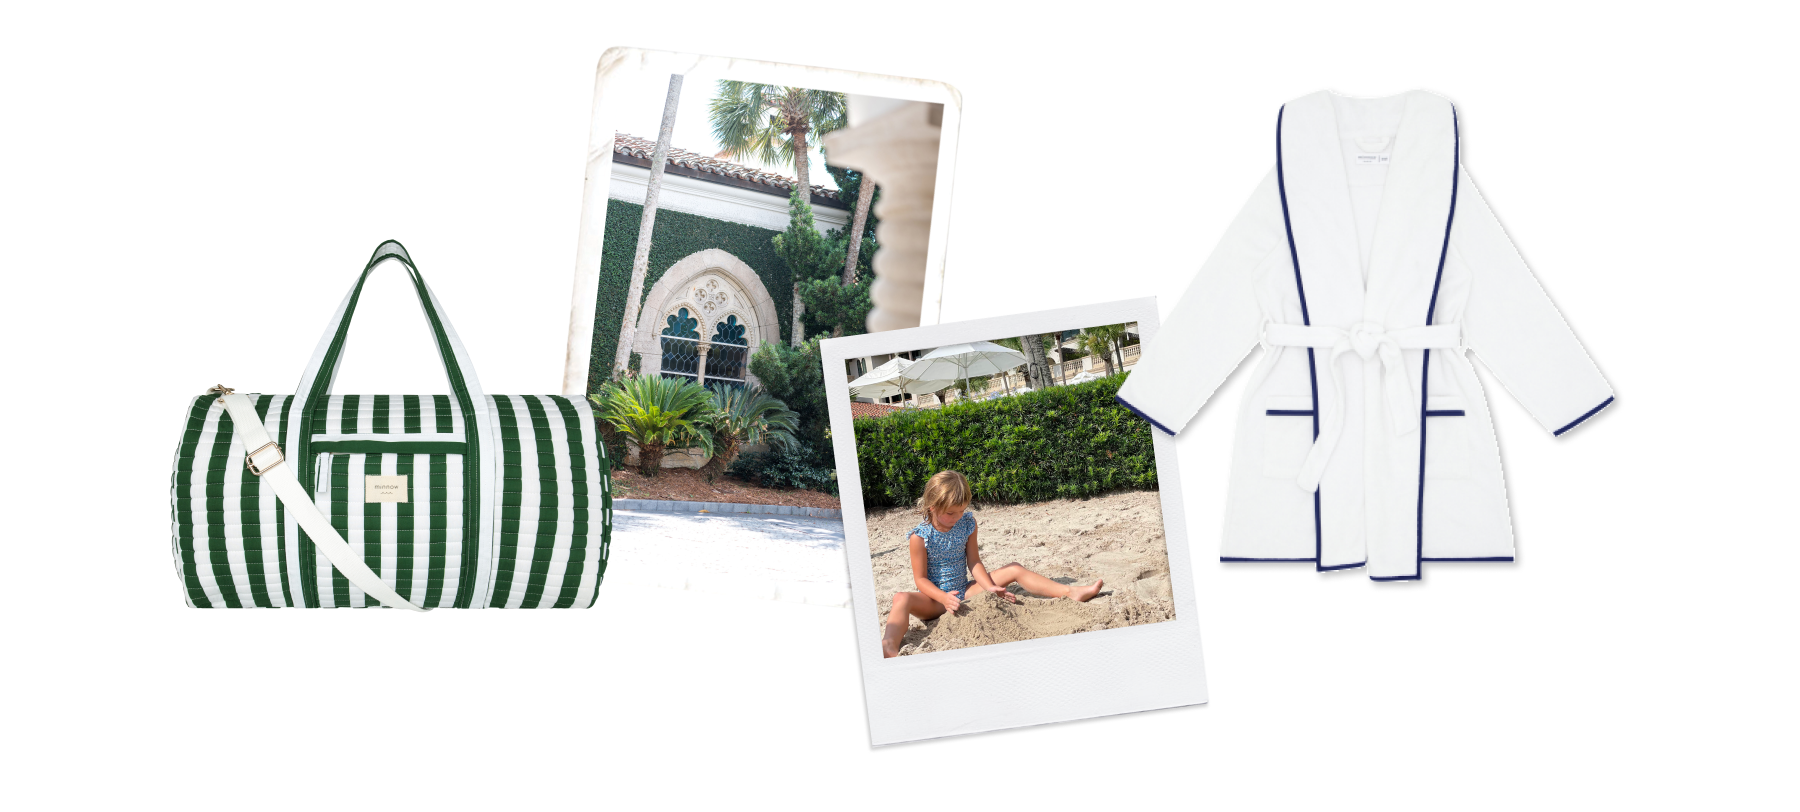 images of minnow product green cabana stripe duffle bag, polaroid images of sea island resort, and robe